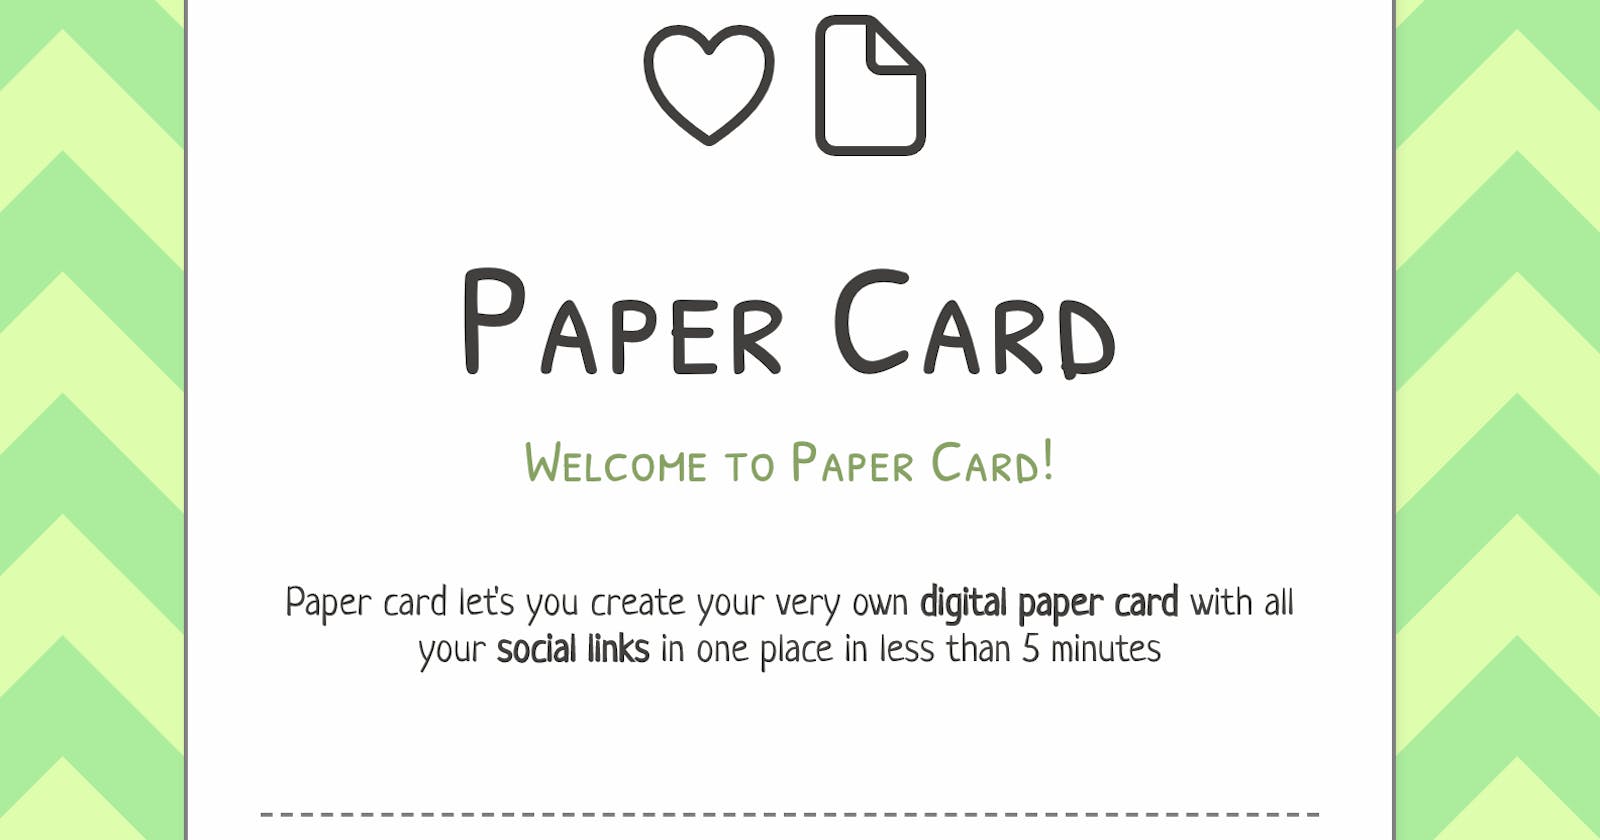 Introducing Paper Card: A smart solution to aggregate all your identities in one place!